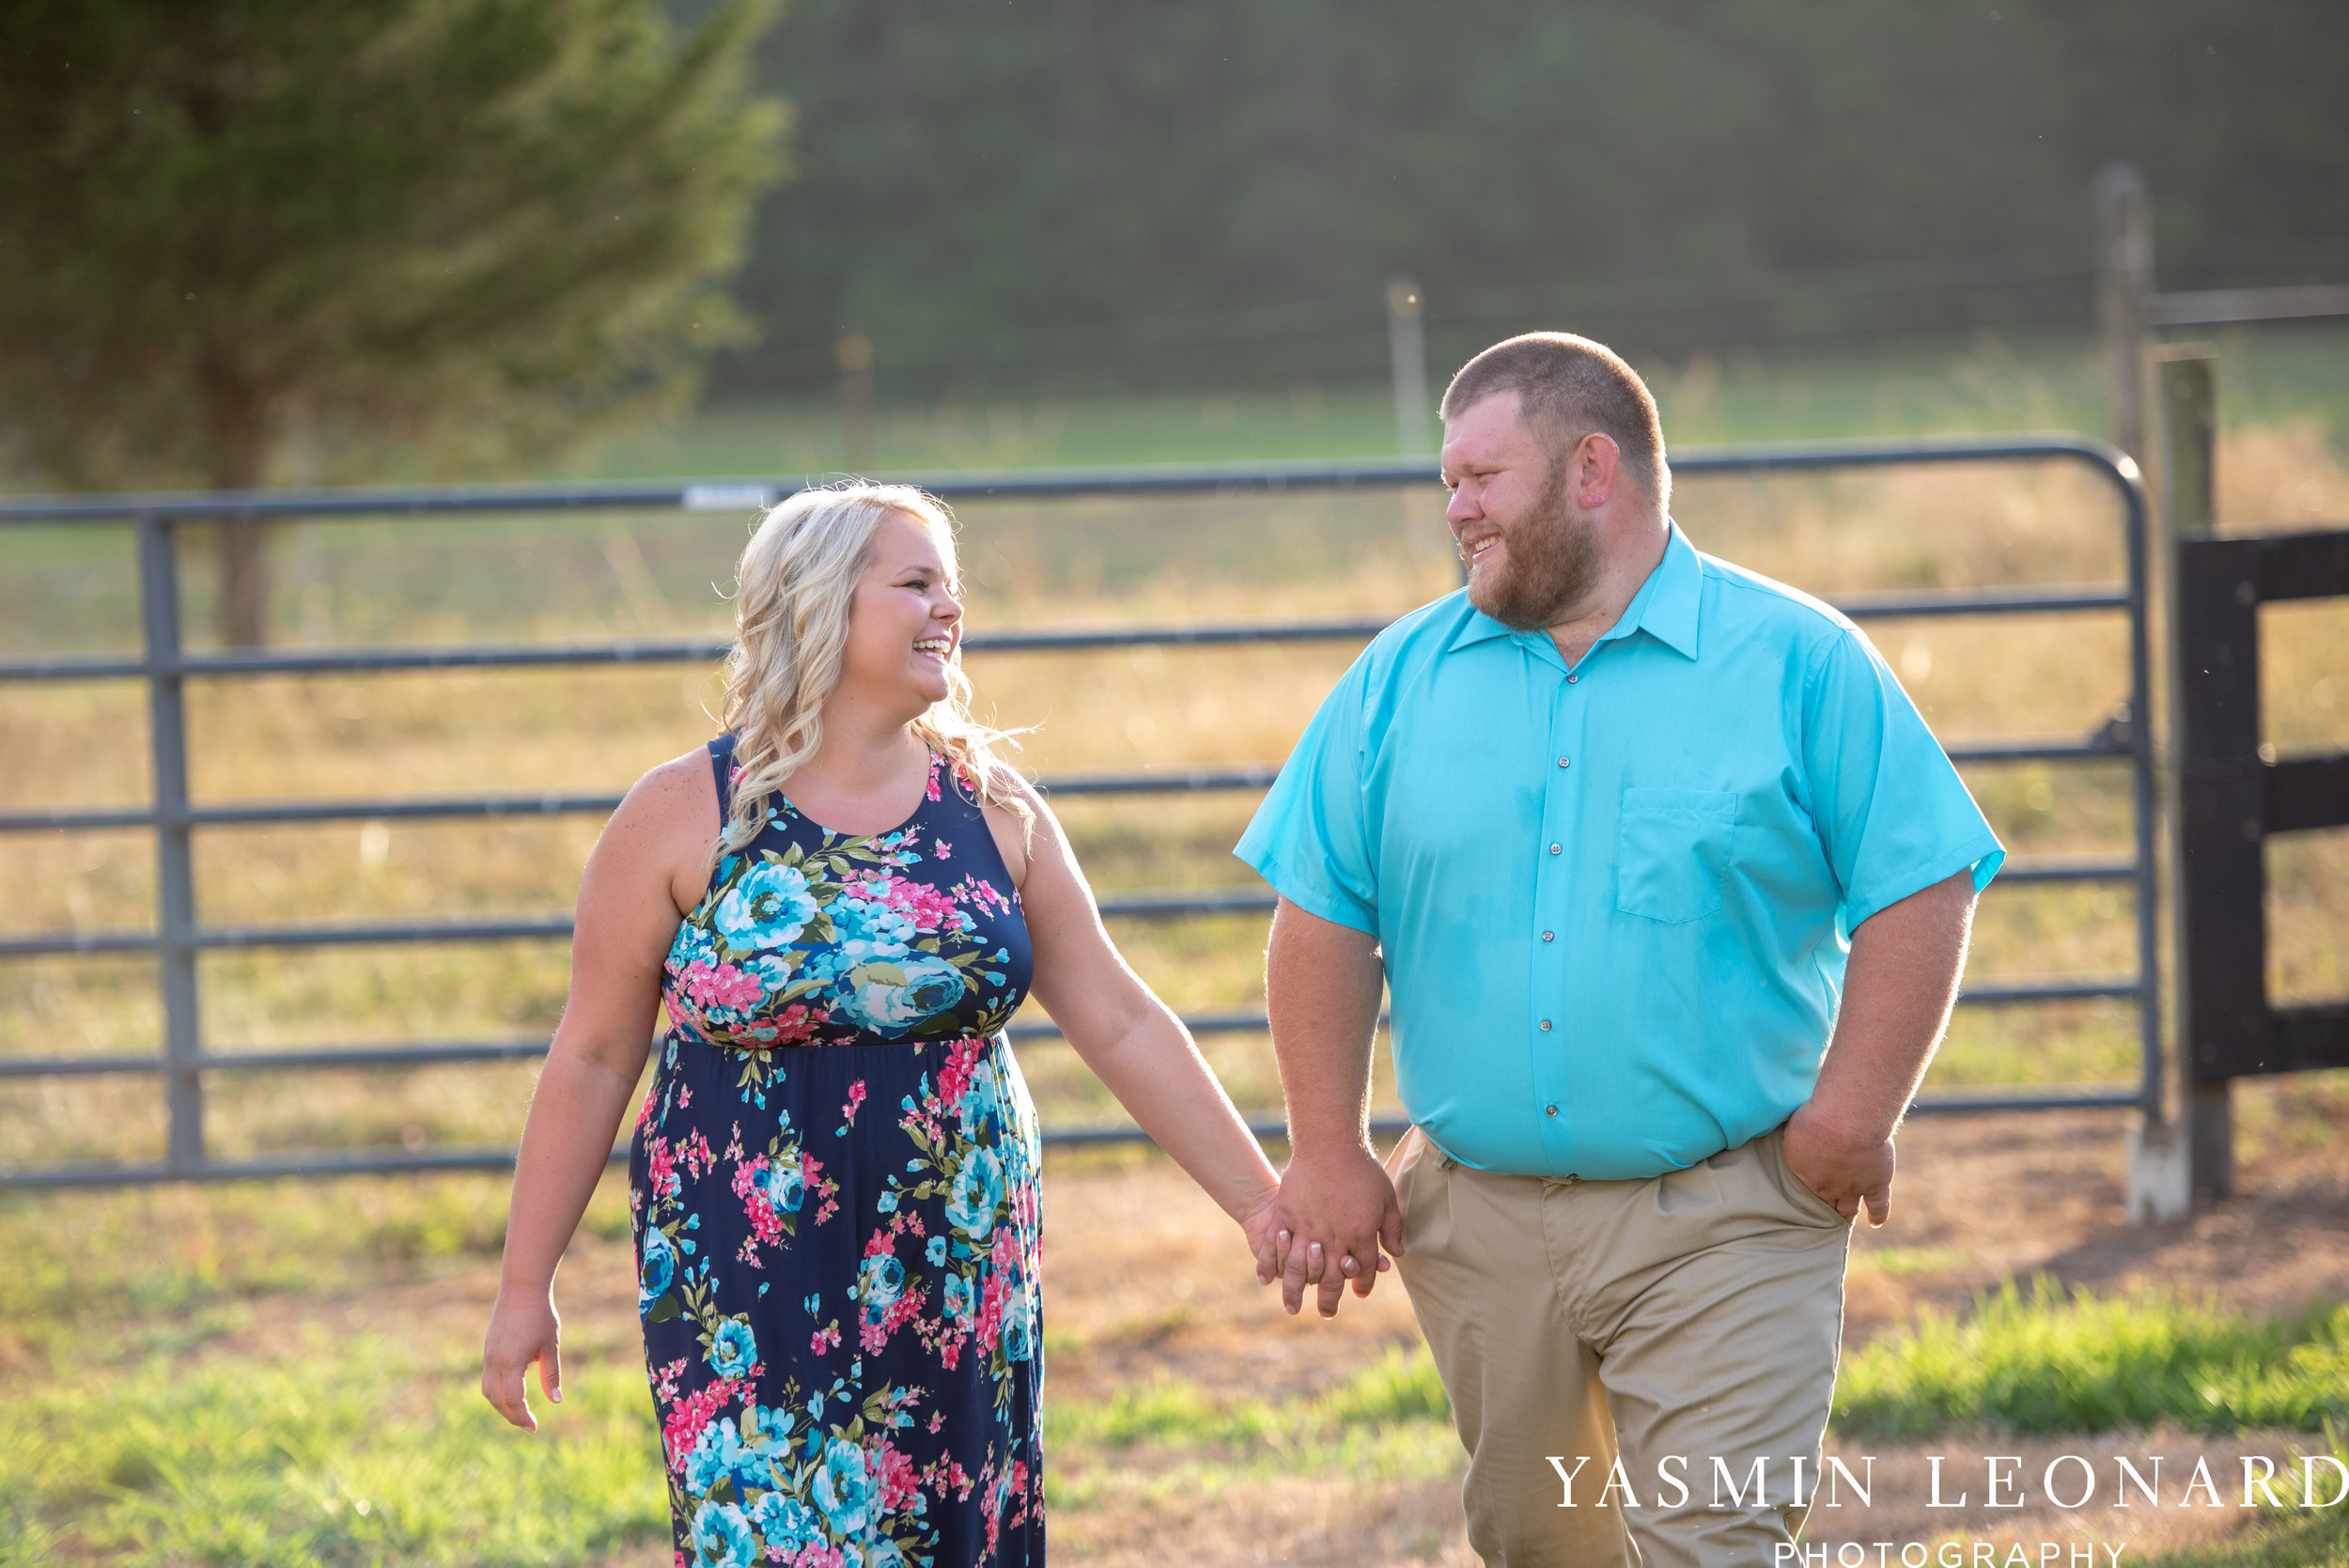 NC Engaged - Wallburg Engagement - Country Engagement Session - Barn Engagement Session - Outdoor Engagement Session - Farmer Engagement Session - Engagement Session with Overalls and Boots-3.jpg